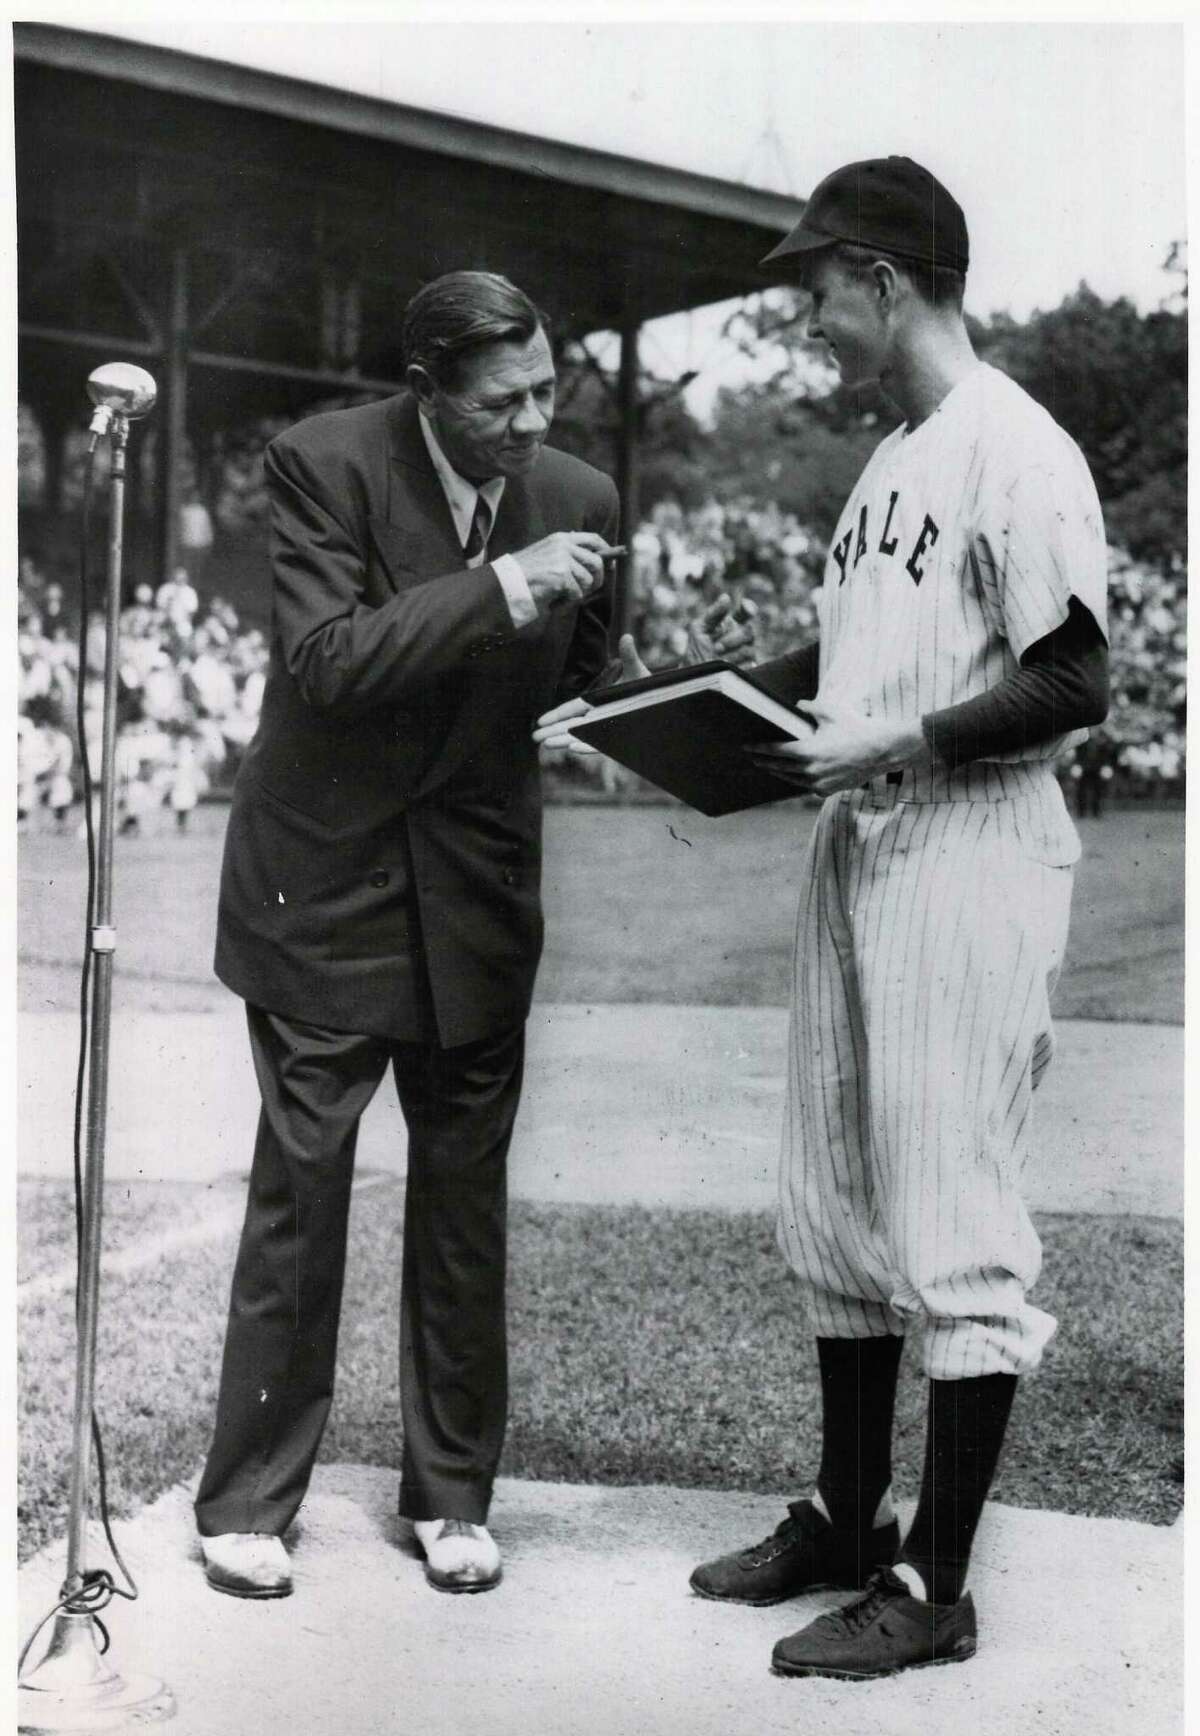 George H.W. Bush welcomes "Babe" Ruth at a pre-game ceremony at the Yale University Field in June 1948. Bush was then captain of the 1948 varsity team. It was one of Ruth's last public appearances as he died later that summer. The photo notes it was donated to the New Haven Register on May 31, 1991 by the Yale University Office of Official Affairs.